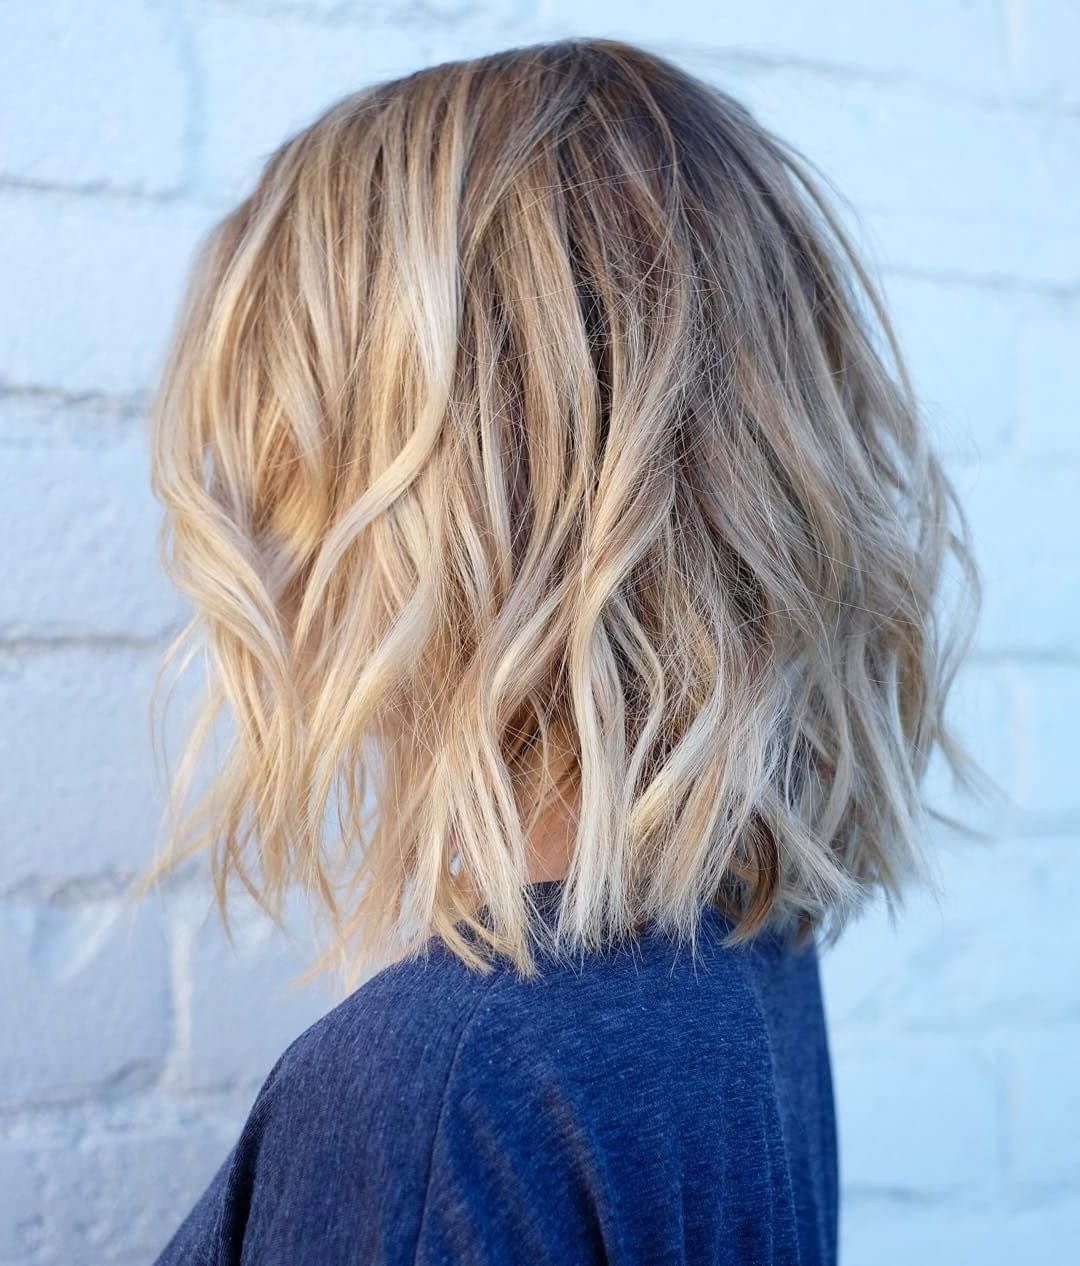 Widely Used Curly Highlighted Blonde Bob Hairstyles For 50 Fresh Short Blonde Hair Ideas To Update Your Style In  (View 4 of 20)